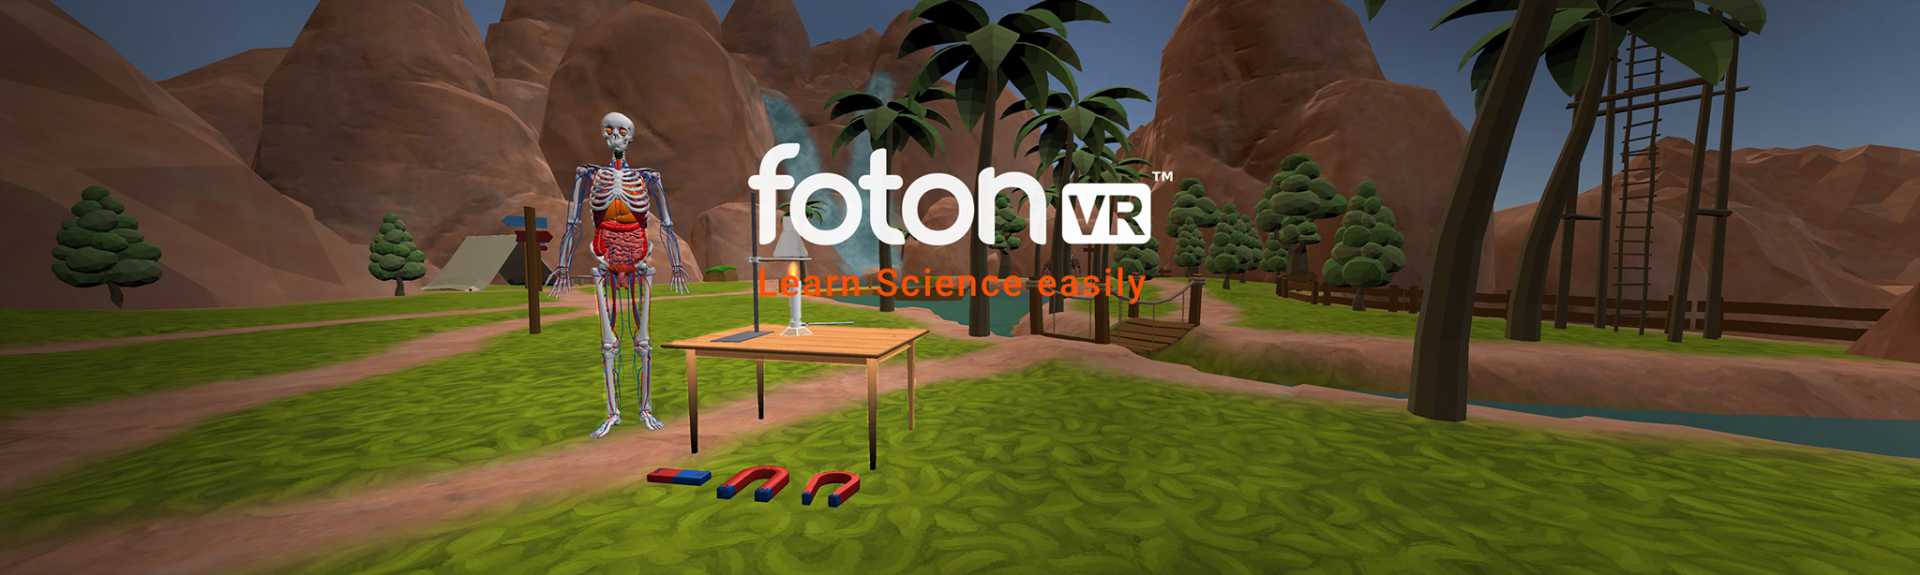 Foton VR | Learn Science Easily